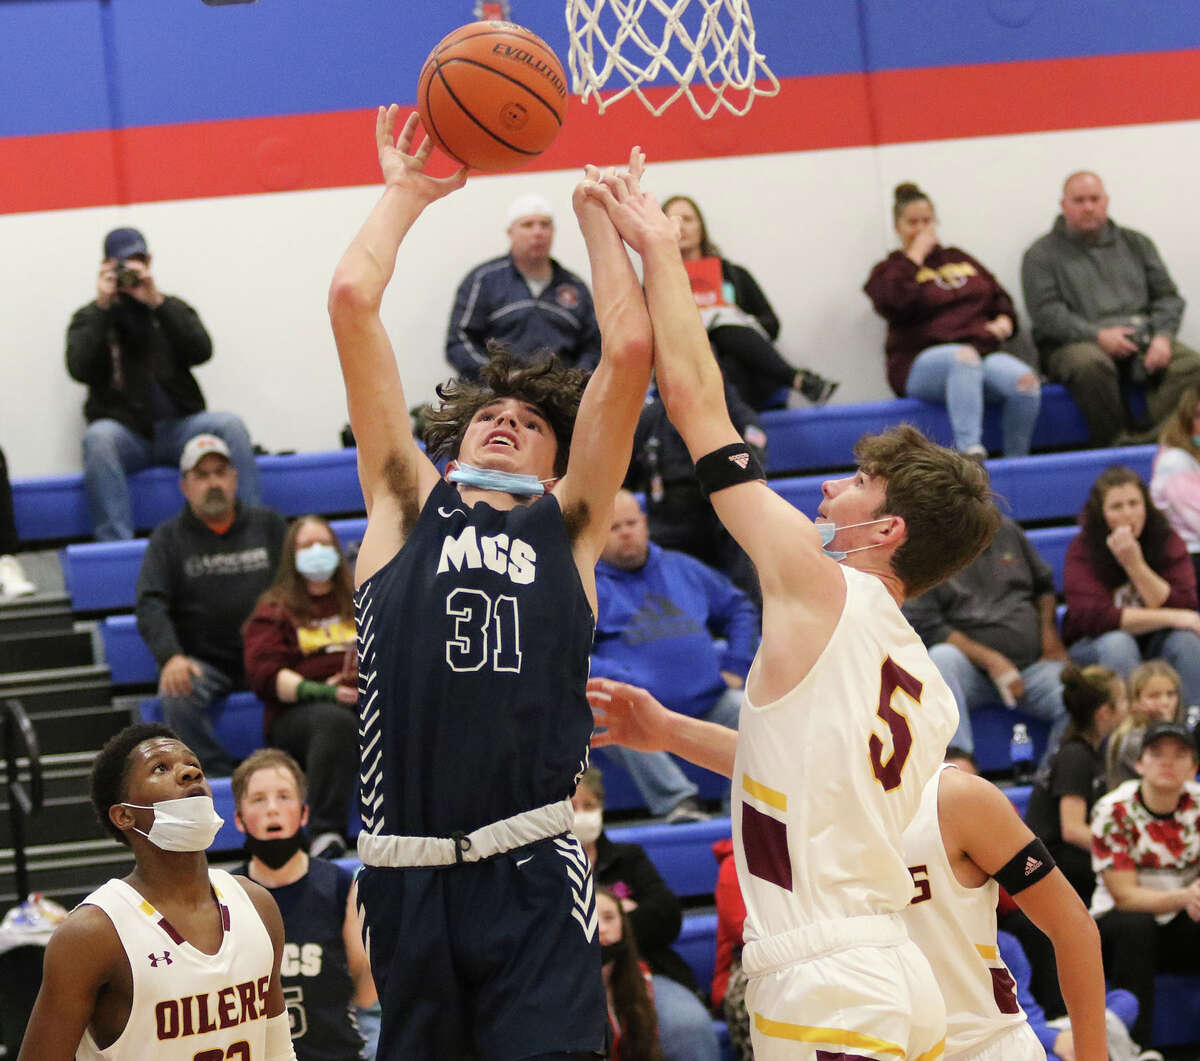 EA-WR's Zach Lybarger (5) blocks a hot by Maryville Christian's Dawson Hendrick during a Roxana Tourney game last month. On Friday night back at Roxana, the Oilers picked up a Cahokia Conference win over the Shells.